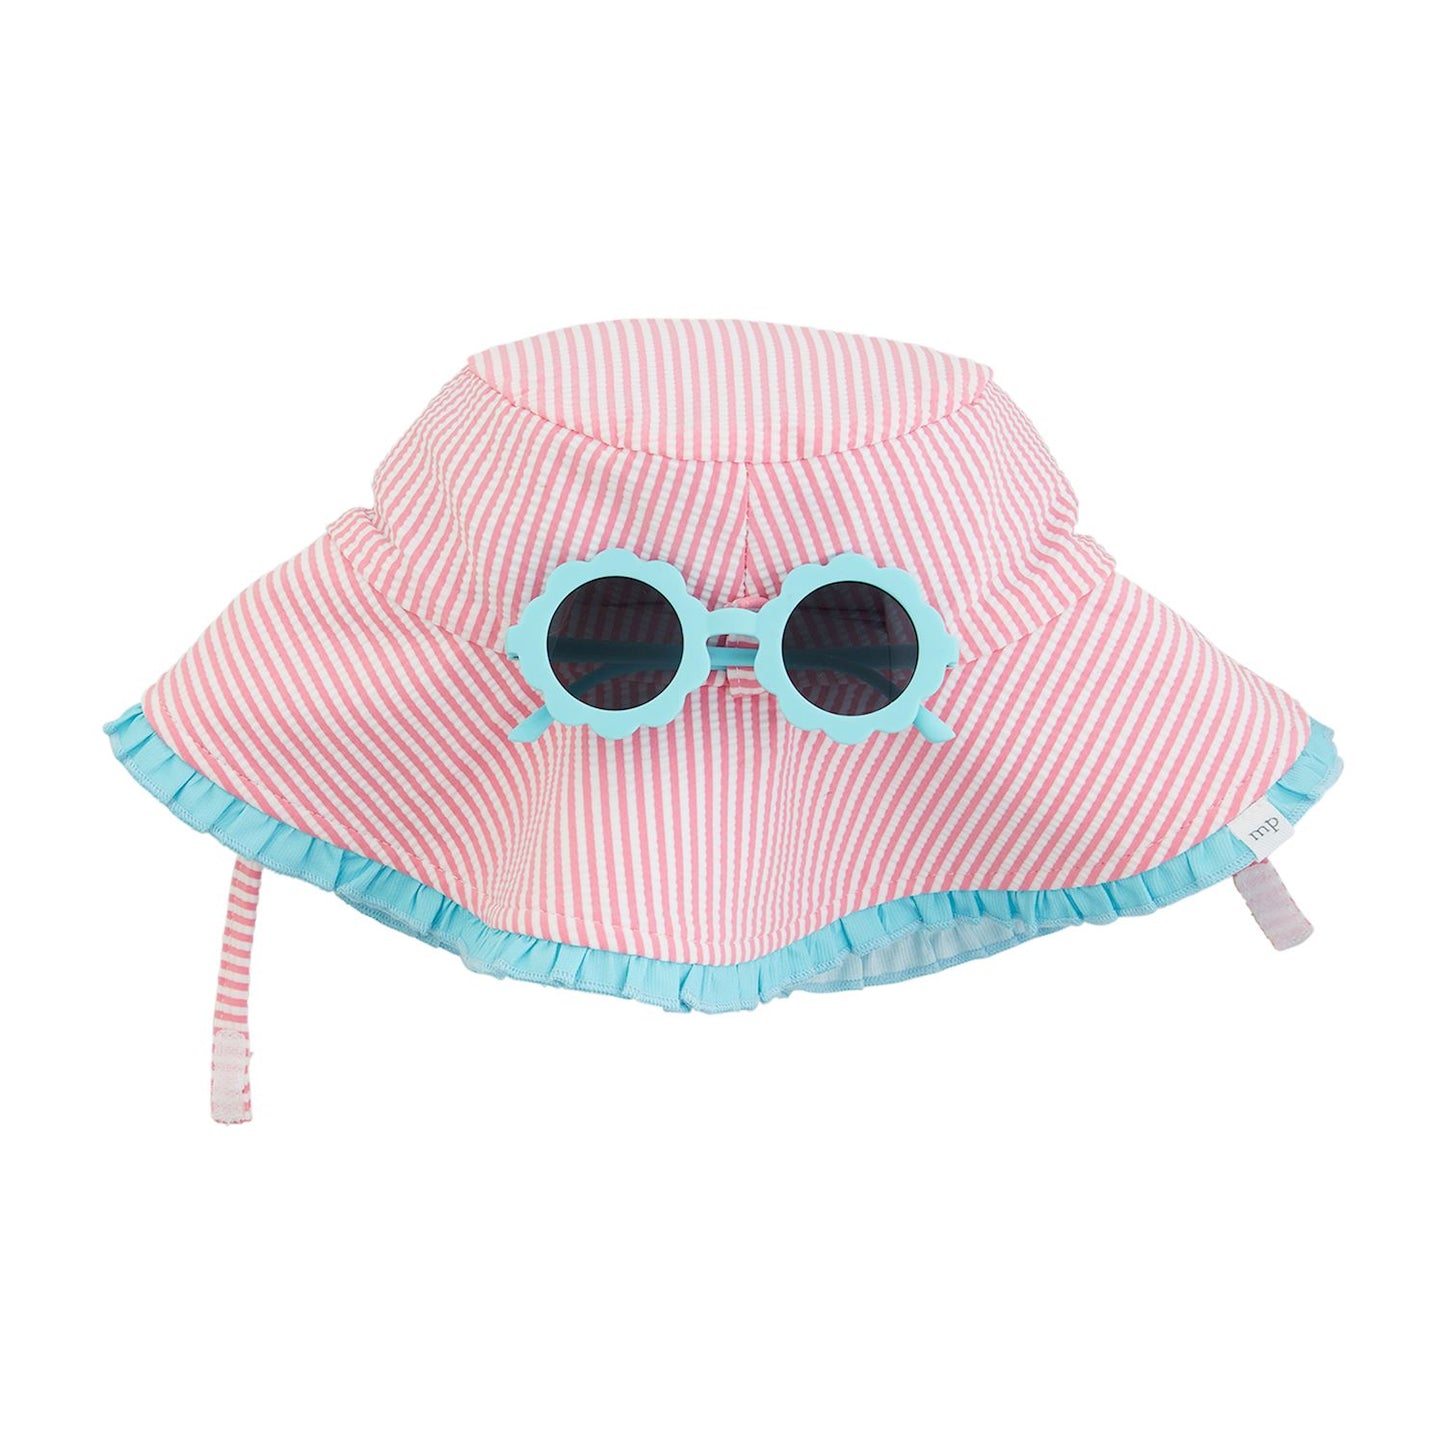 PINK/BLUE HAT AND SUNGLASSES